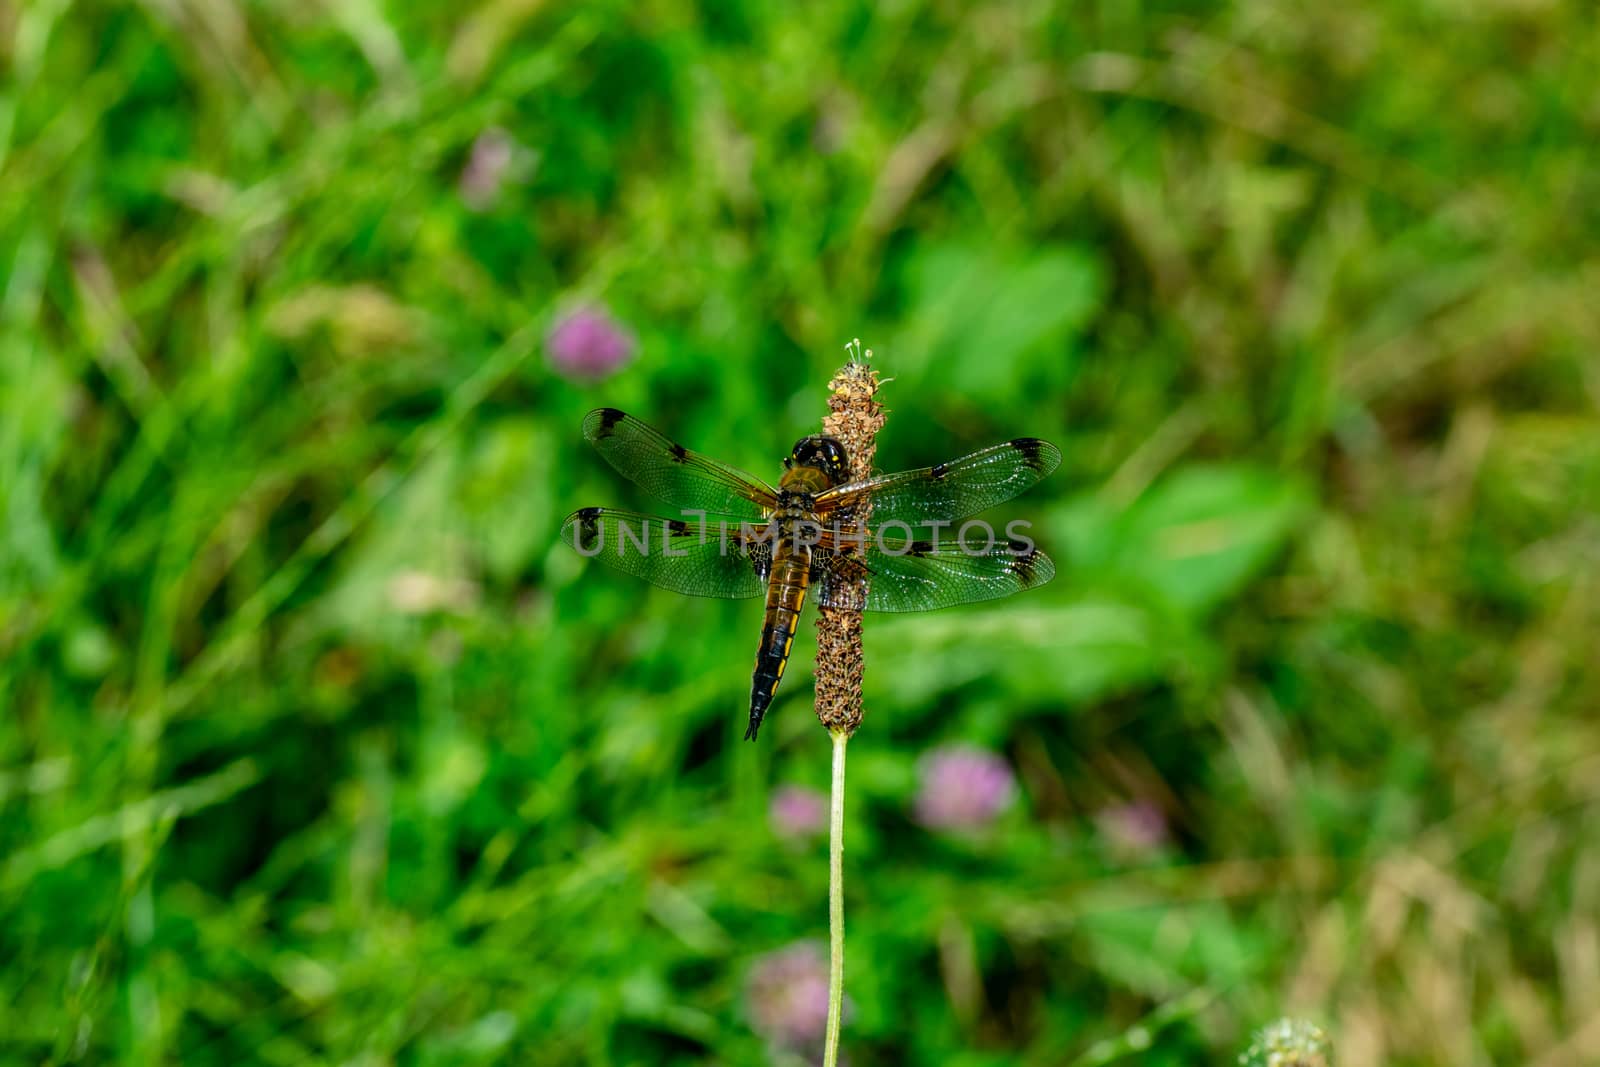 DRAGONFLY ON THE FLOWER by carfedeph